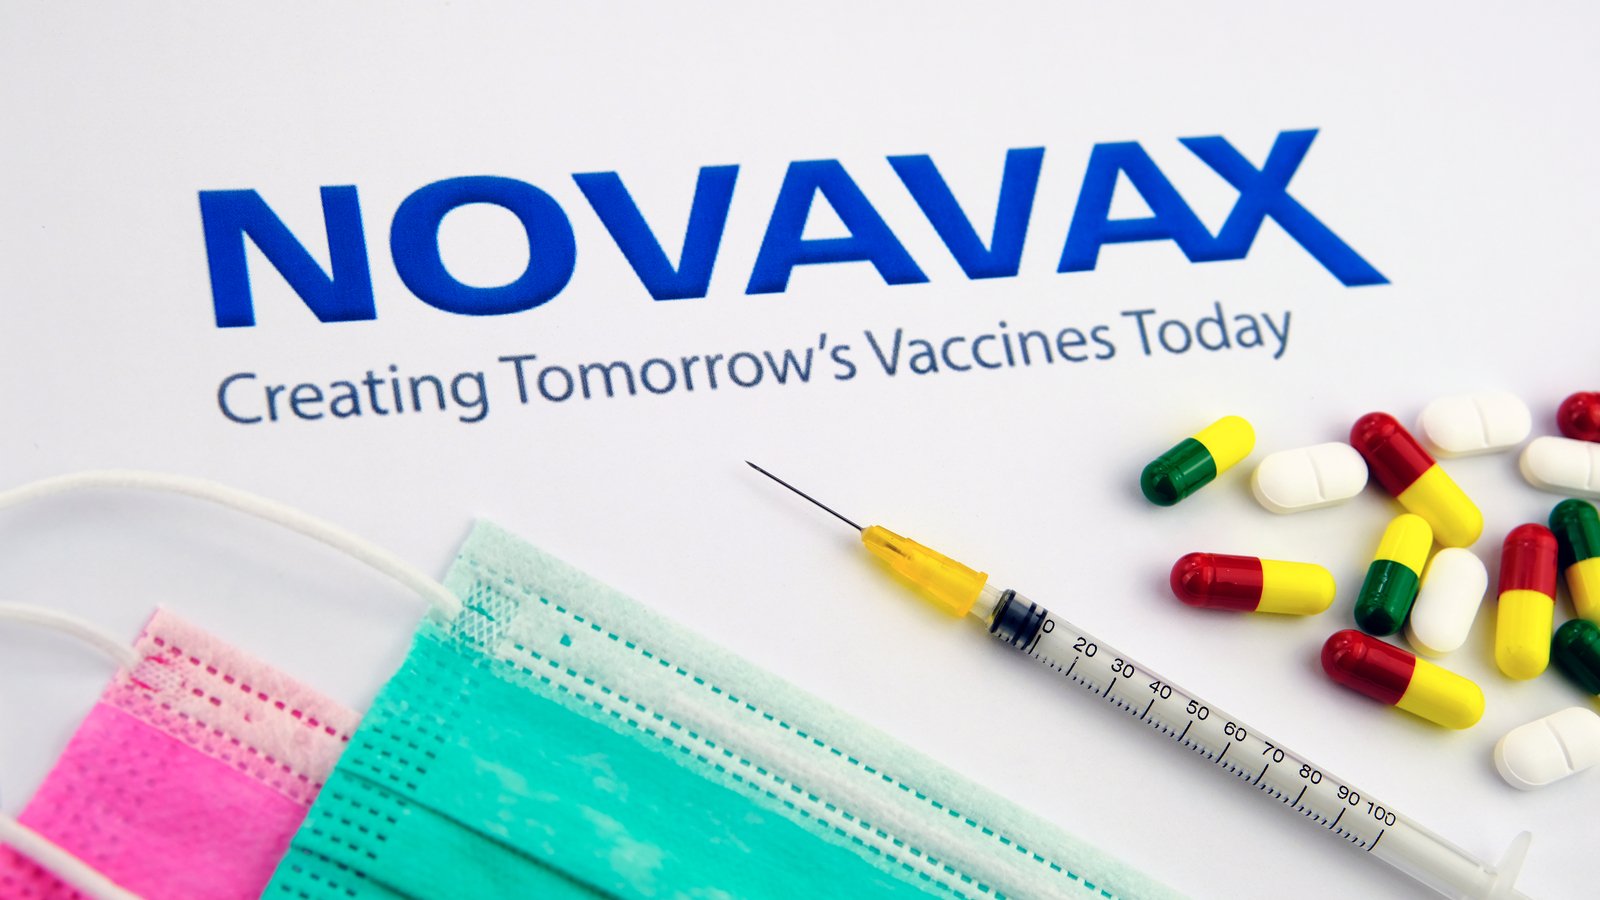 Novavax (NVAX) logo surrounded by medical supplies